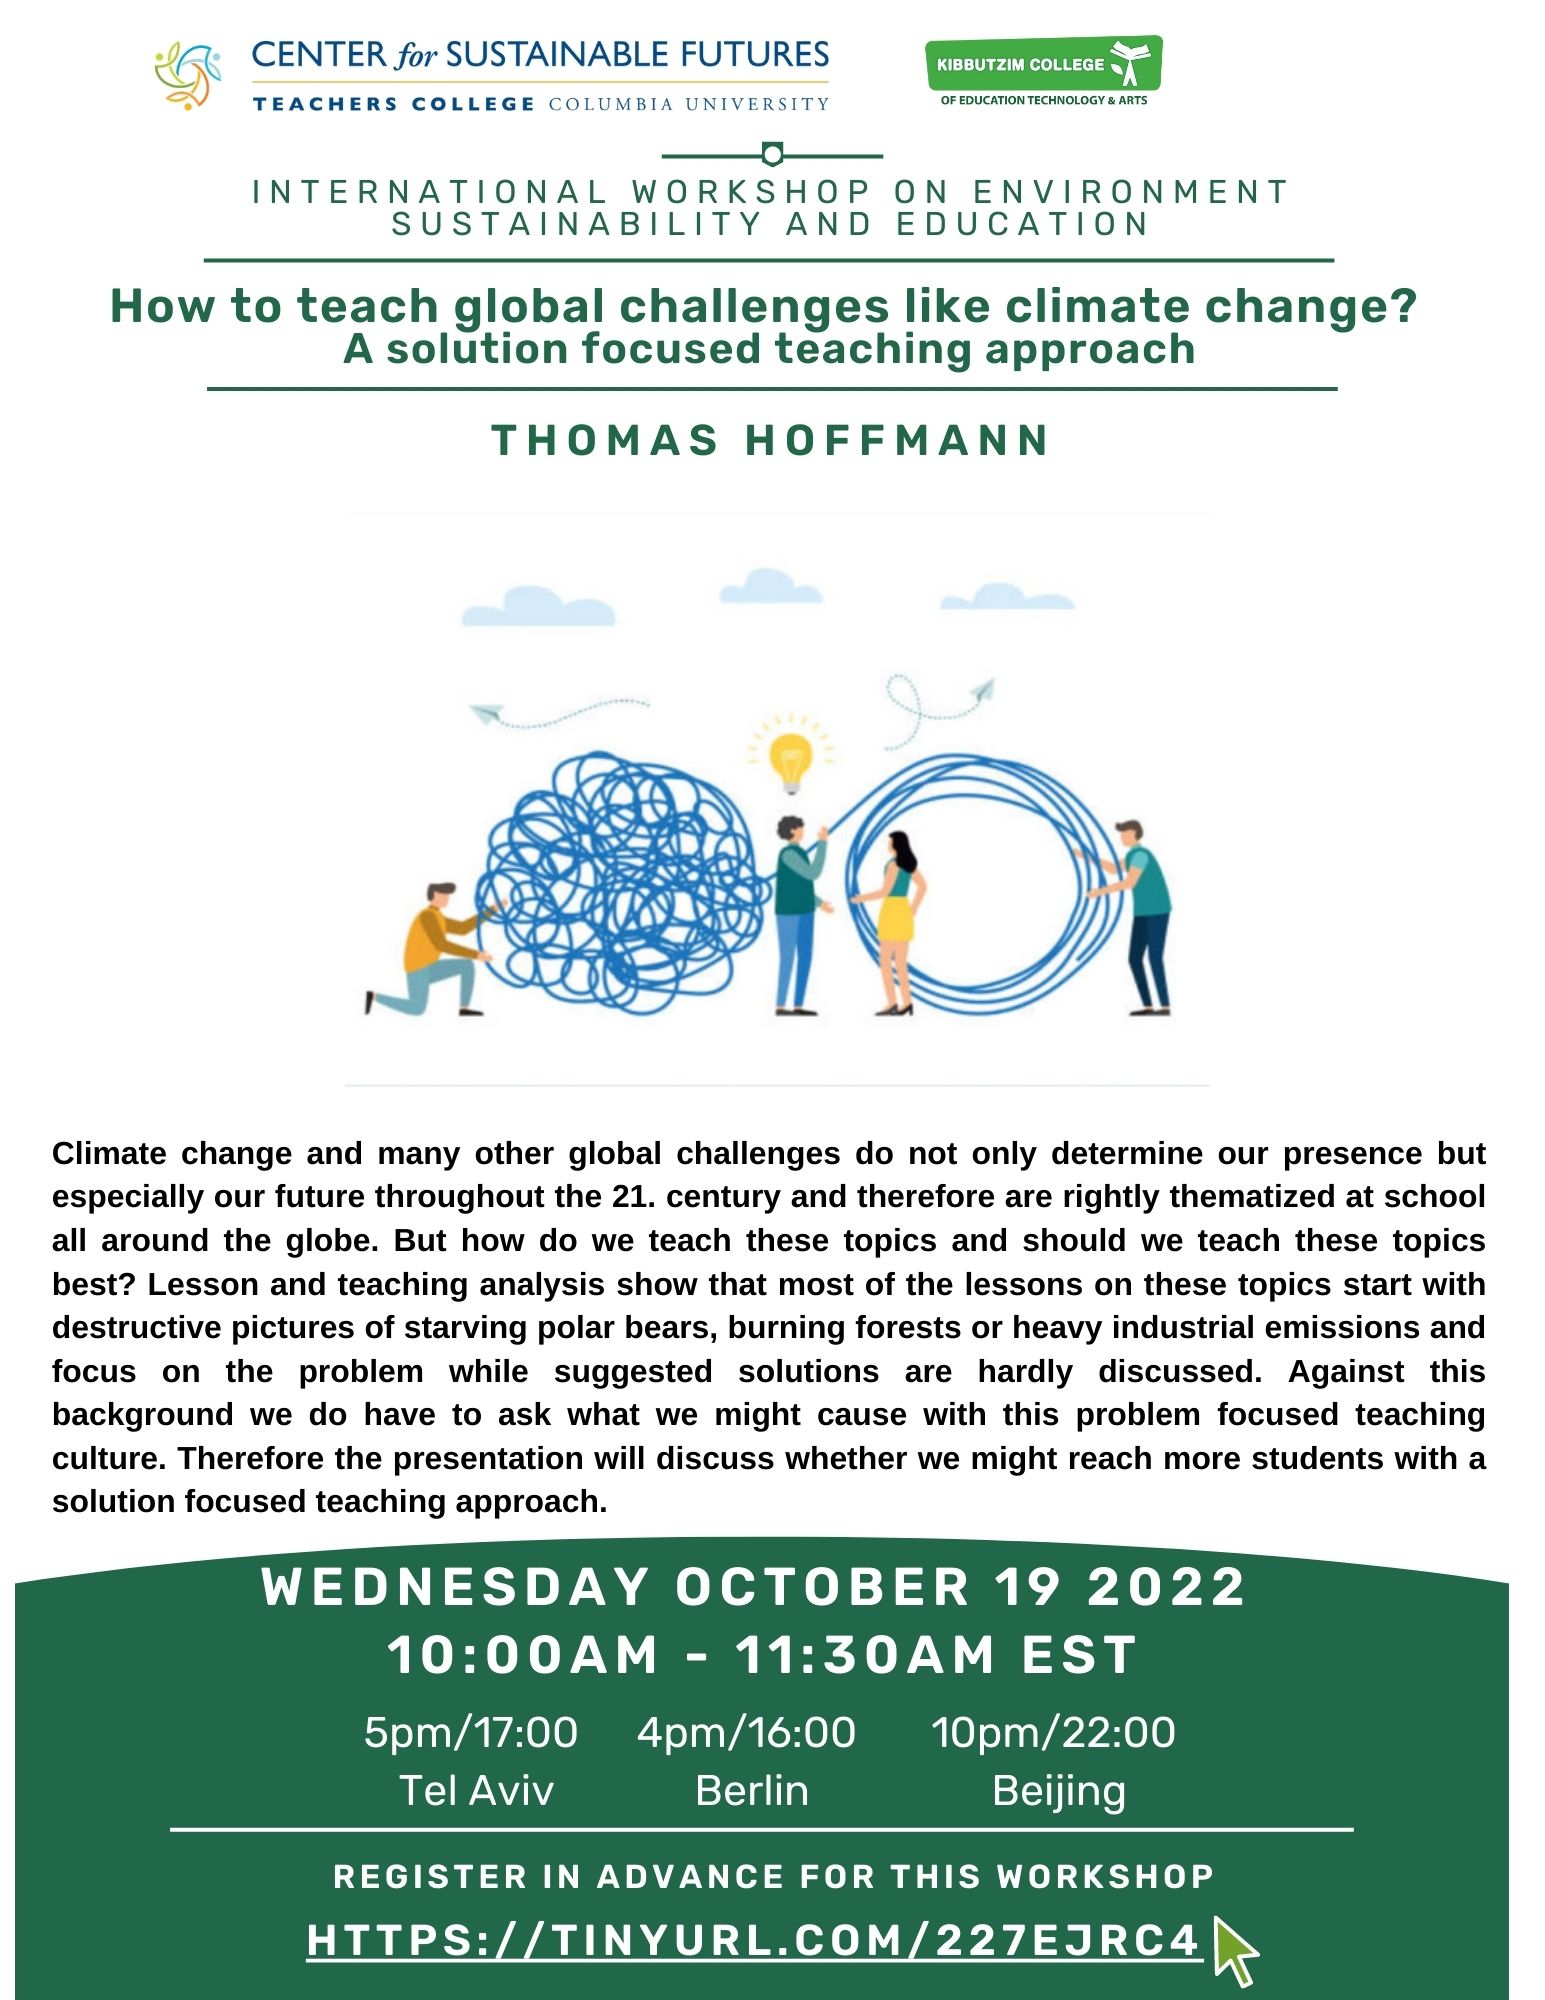 Event Flyer for How to teach global challenges like climate change? A solution focused teaching approach.; For more details, refer to the event descriptions below.